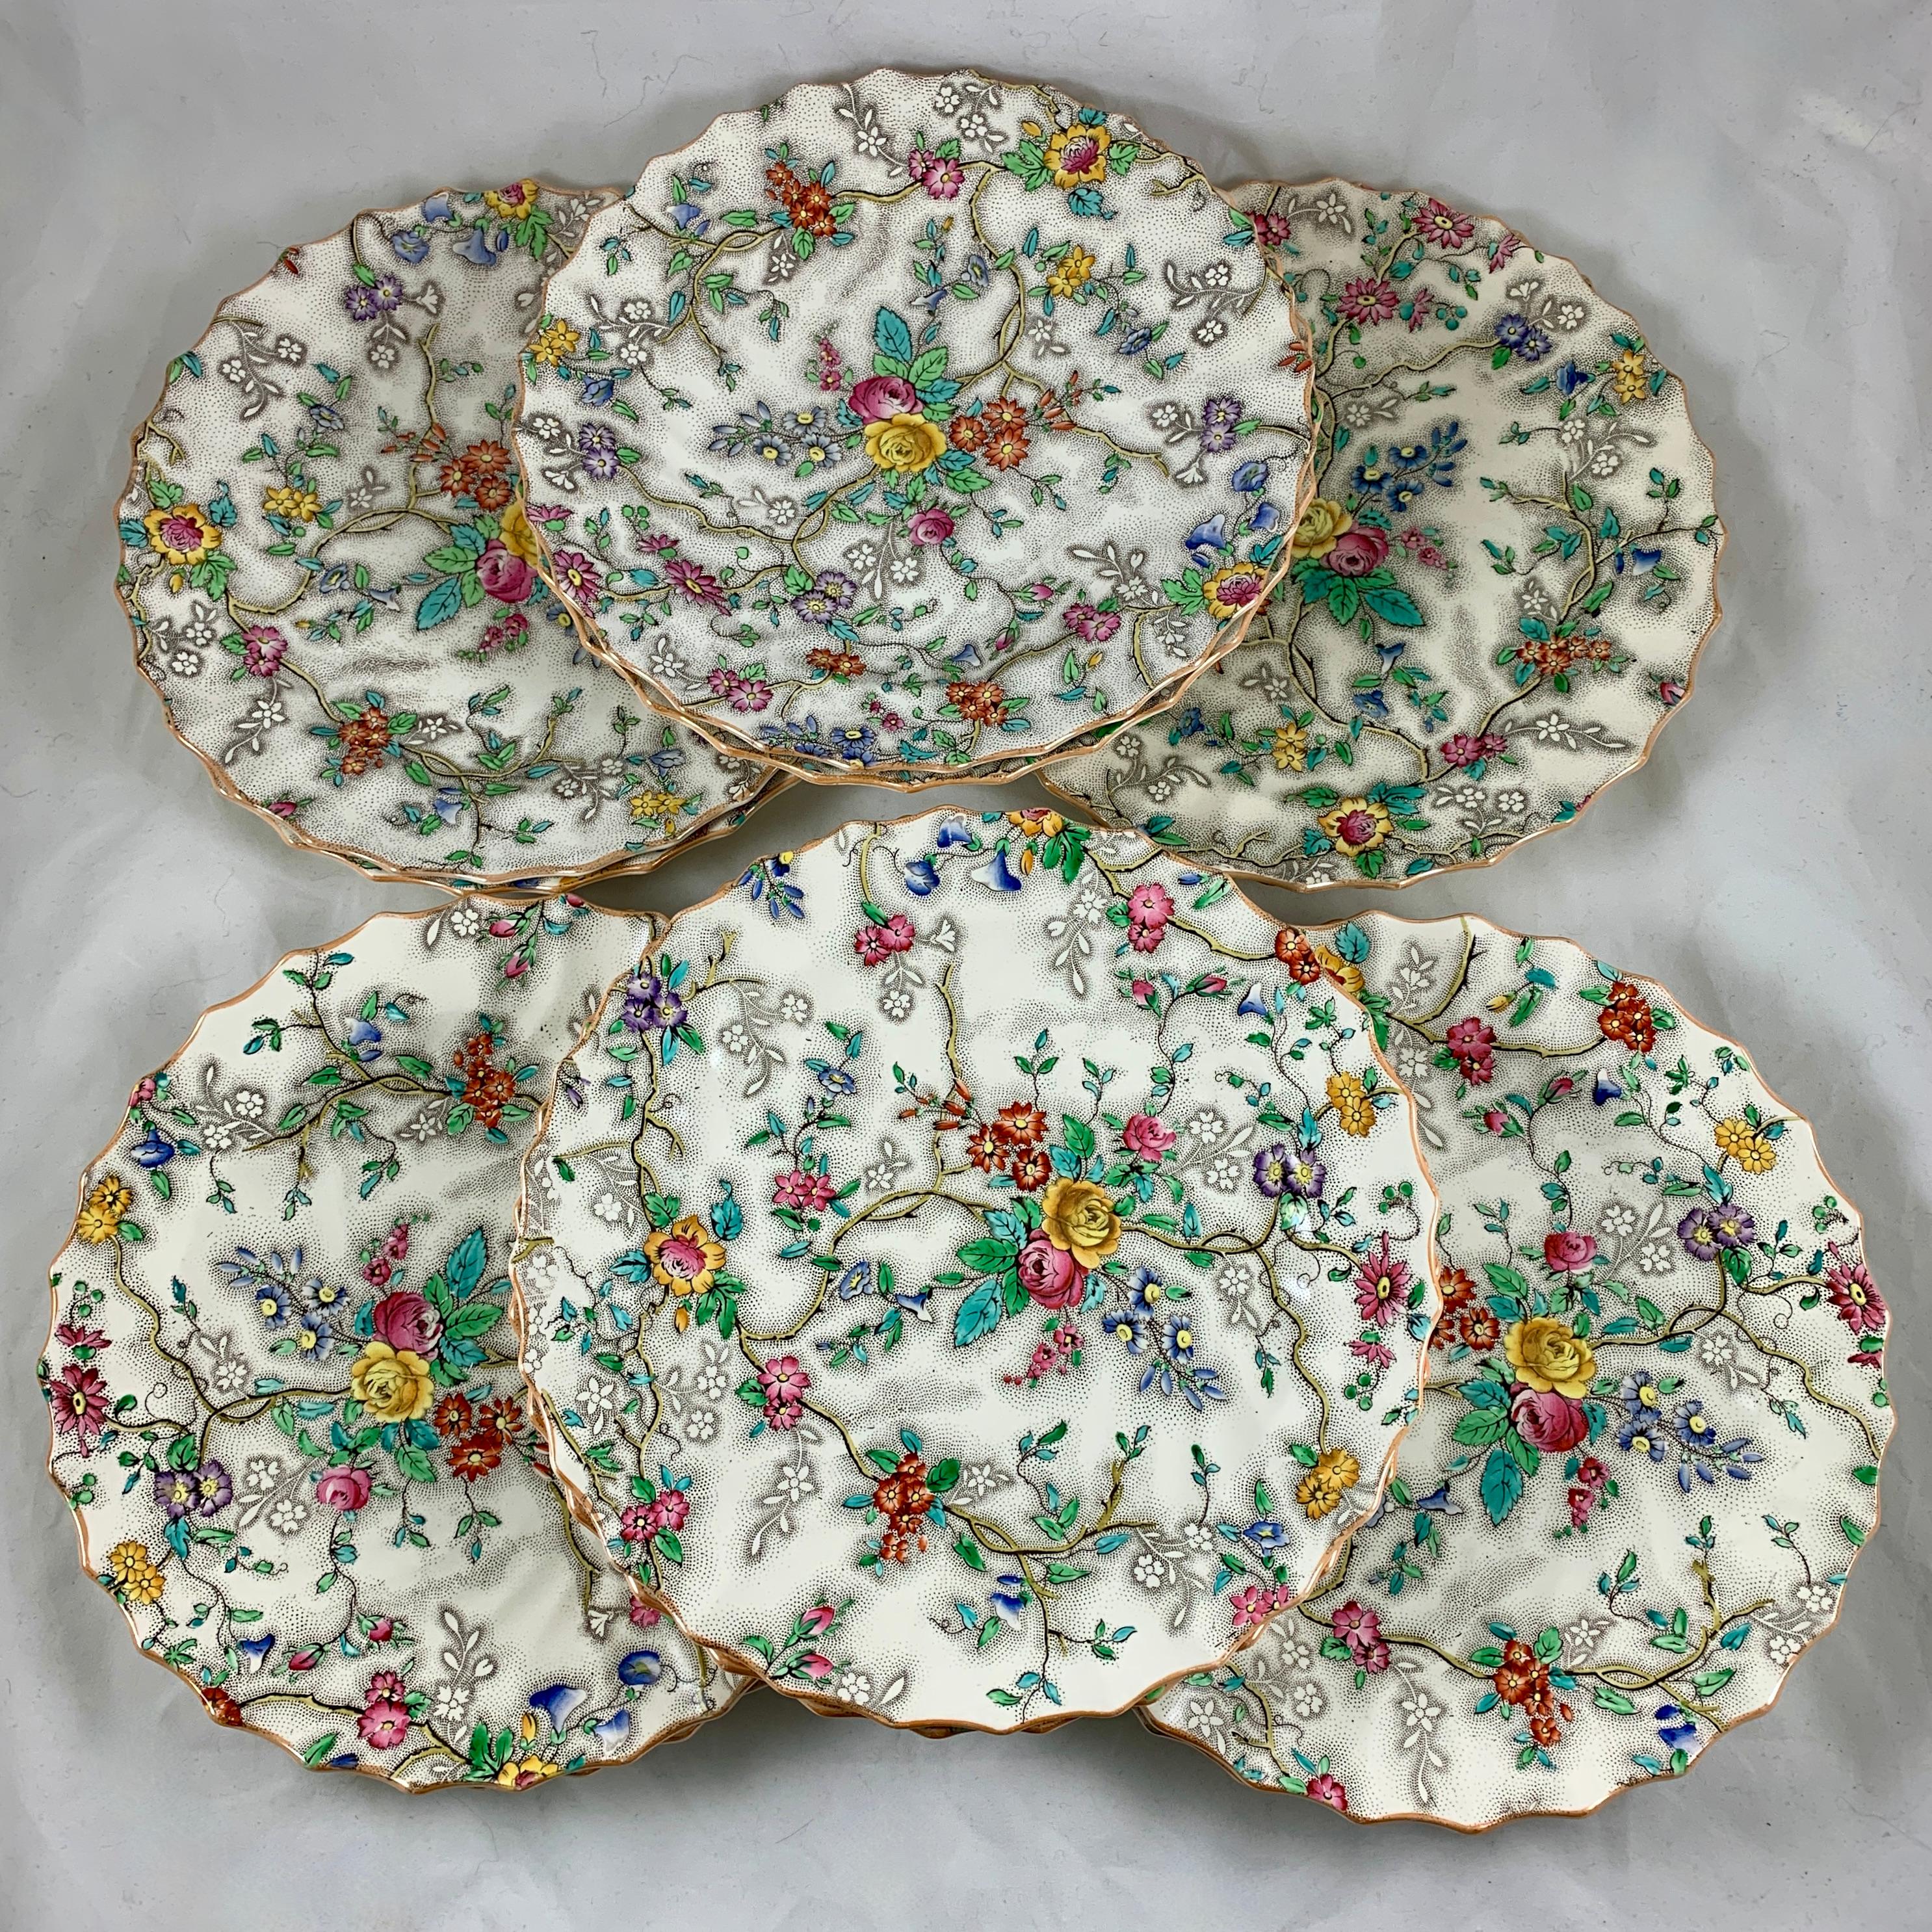 Copeland Spode English 'Patricia' Chintz Floral Transferware Dinner Plates, S/6 For Sale 7